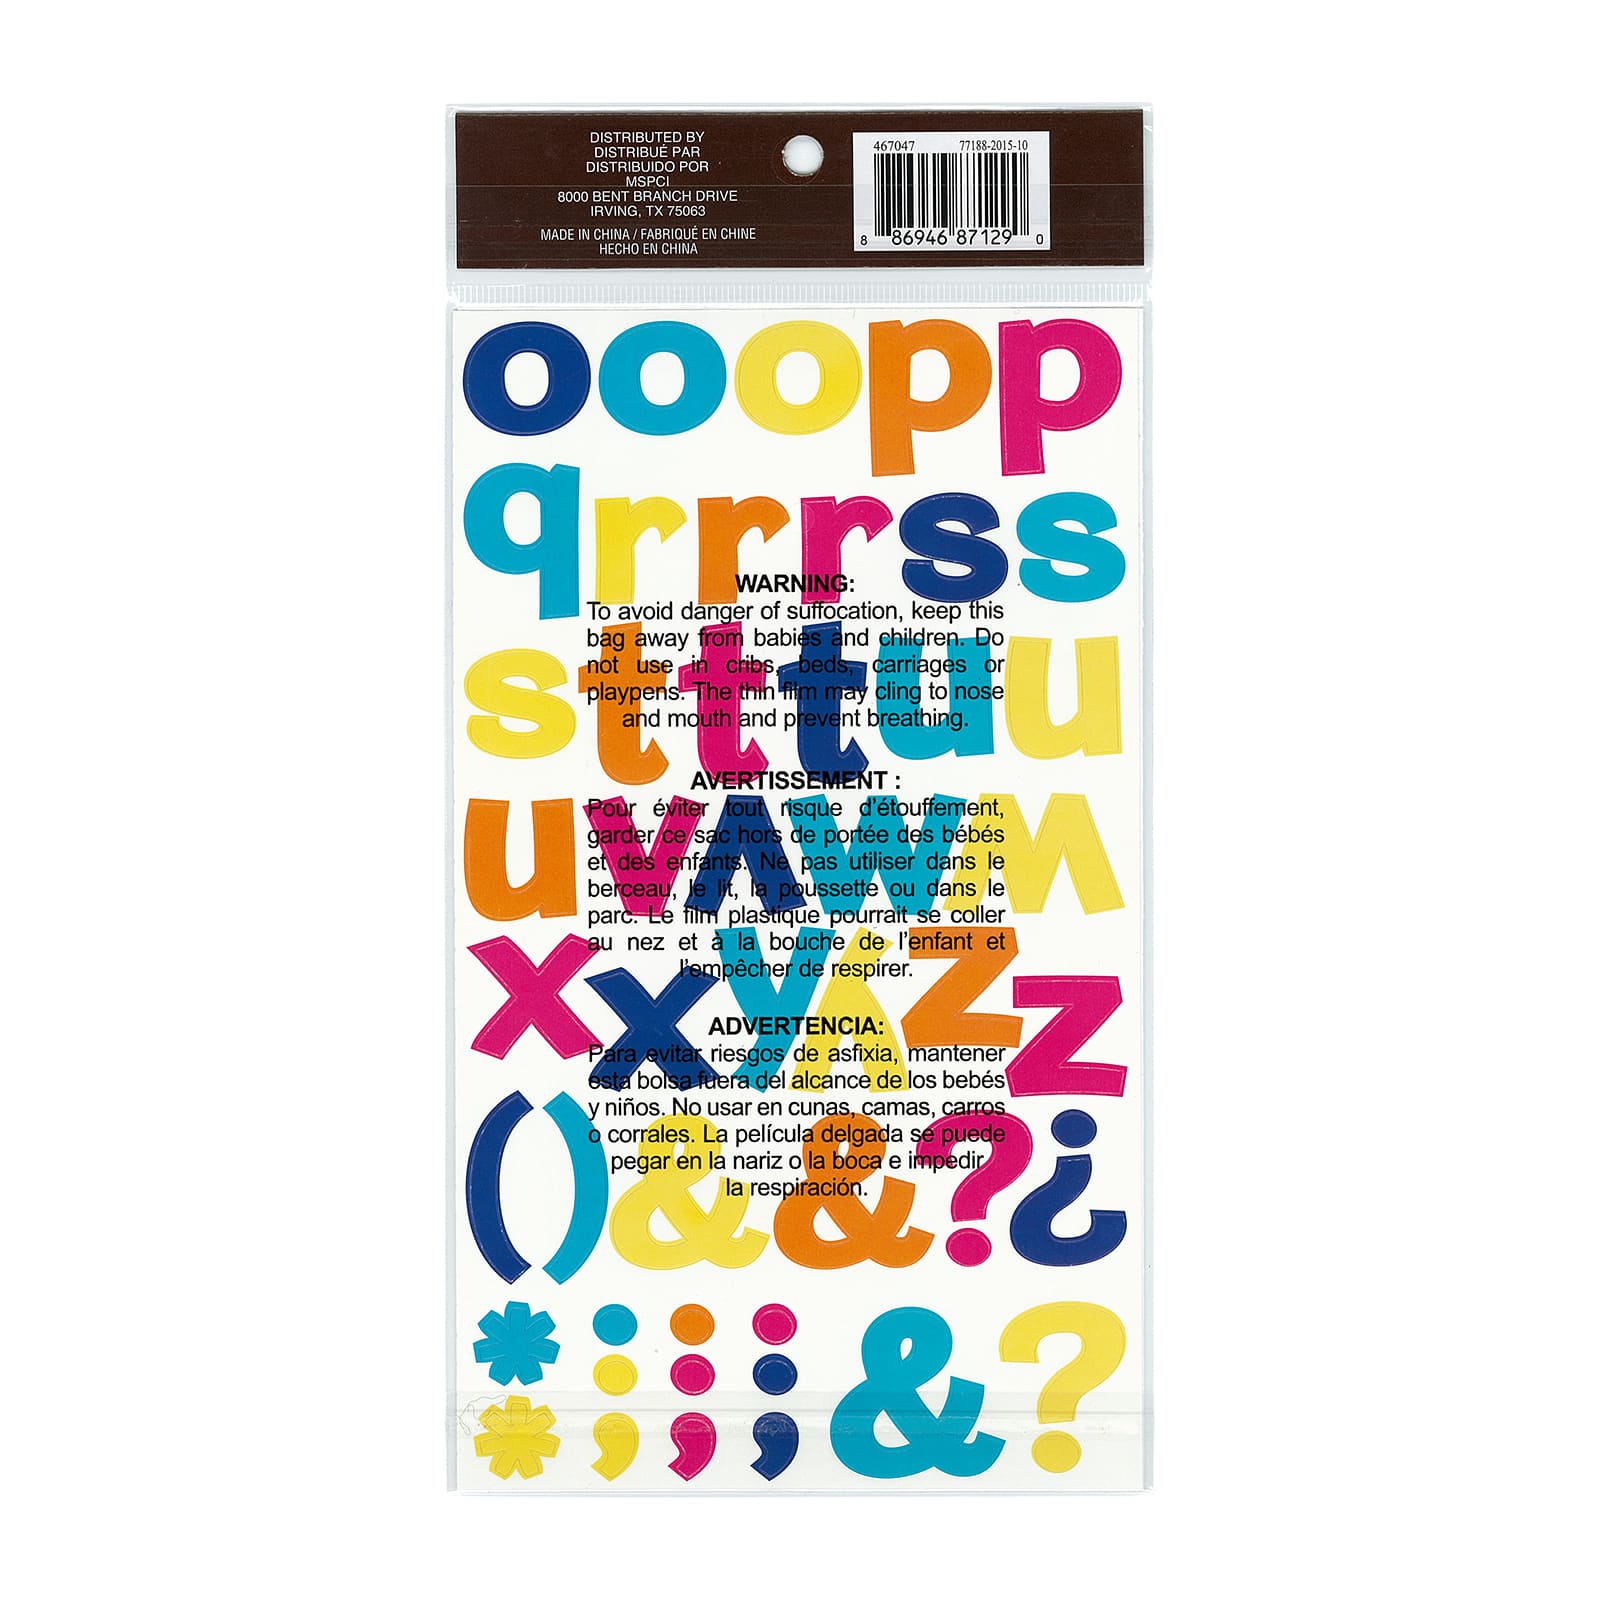 Sticko Multicolor Holographic Poster Paper Alphabet Stickers, 97 Pieces 